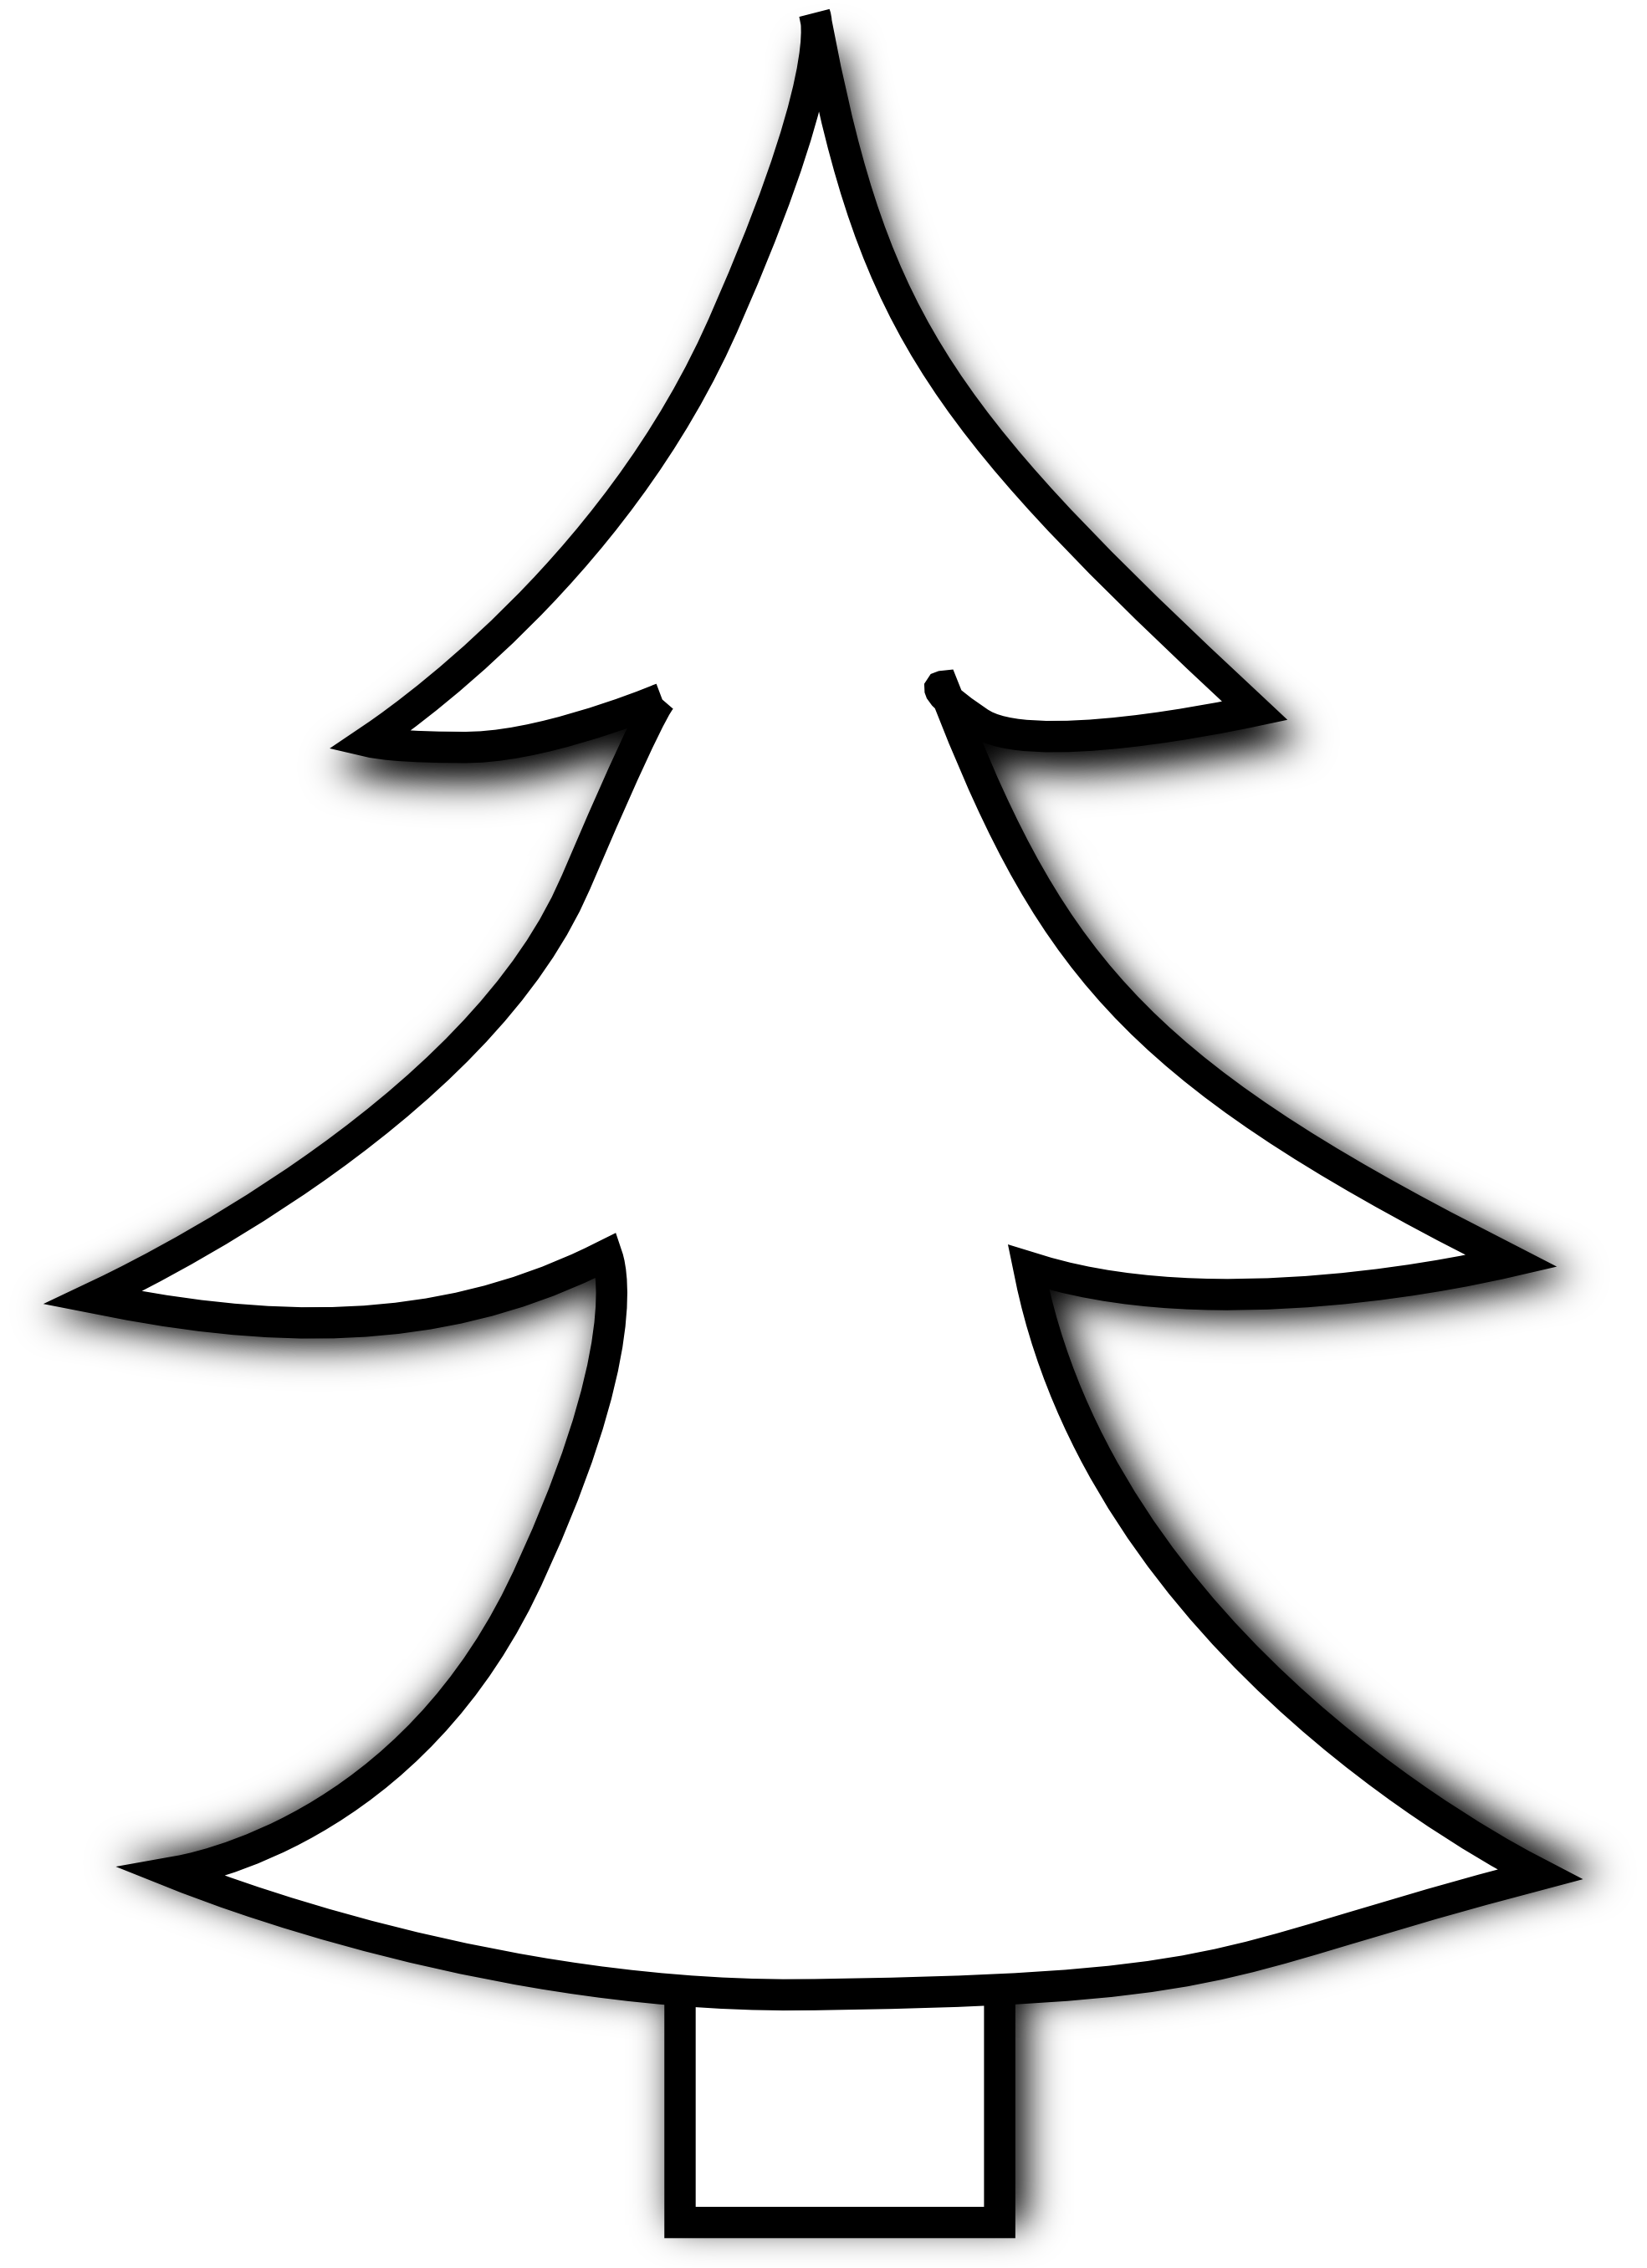 Tree clipart black and white simple - ClipartFox